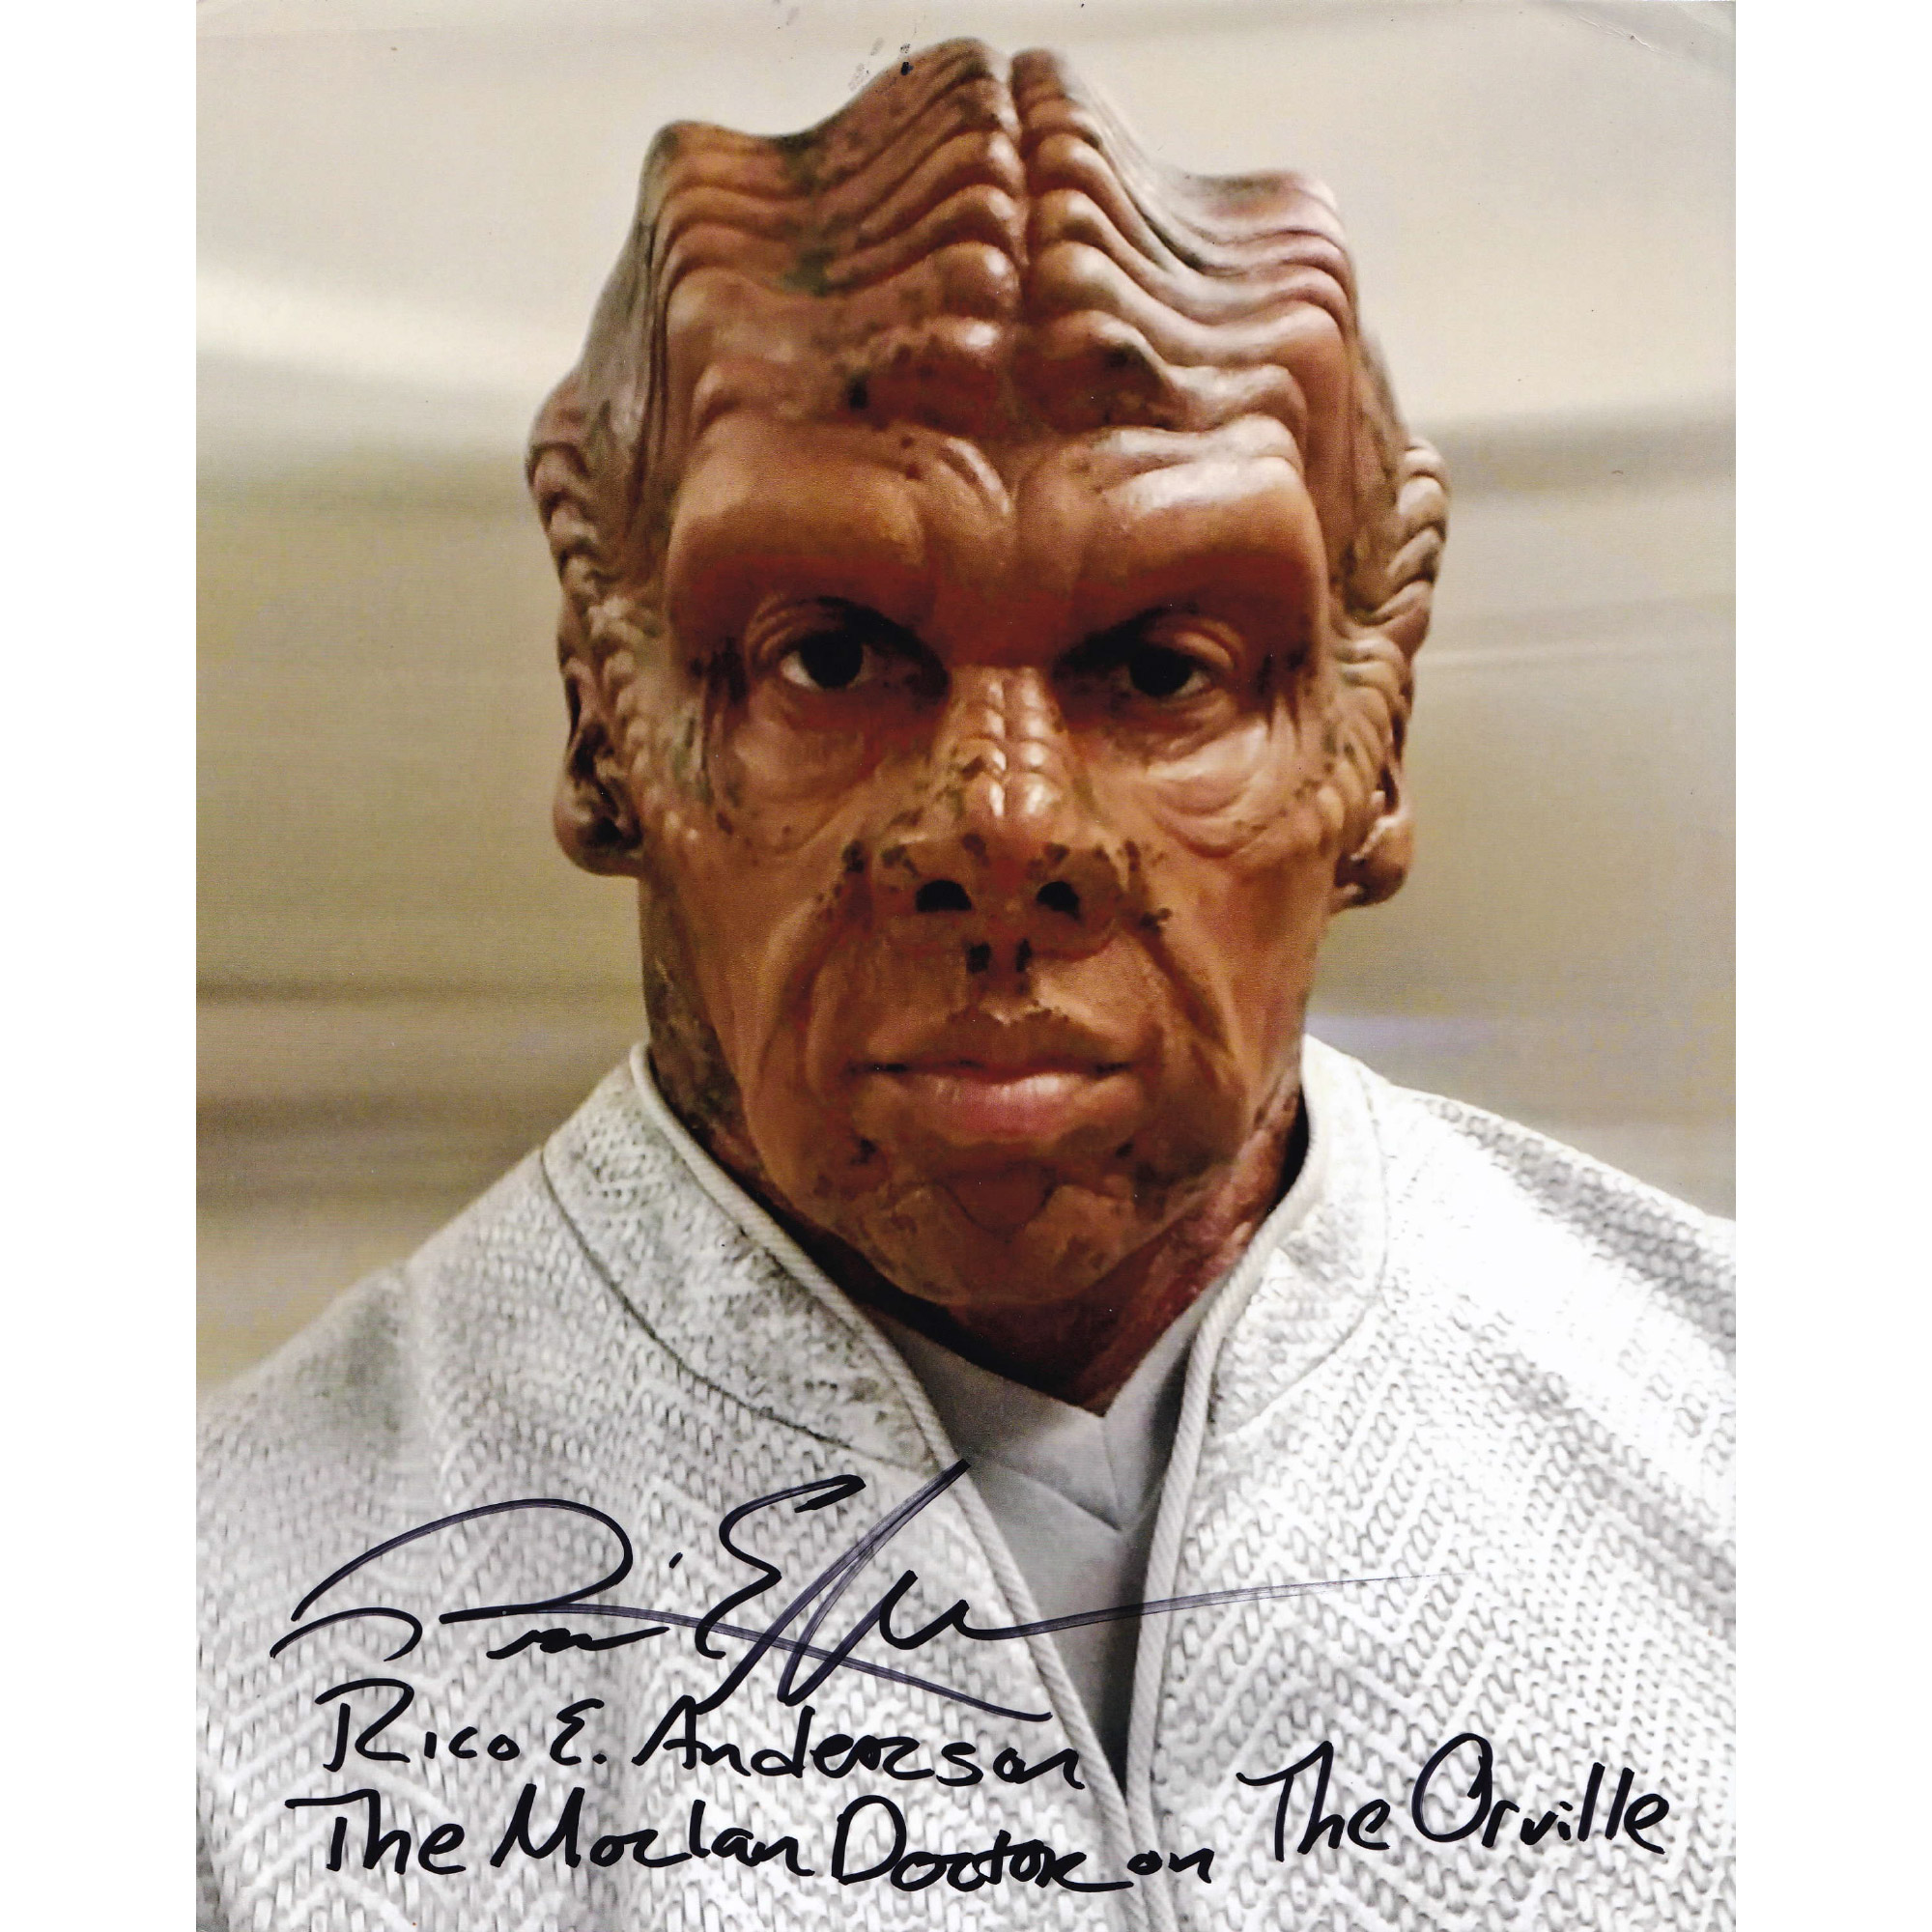 Rico E. Anderson – Hand Signed The Orville 8×10 Photograph